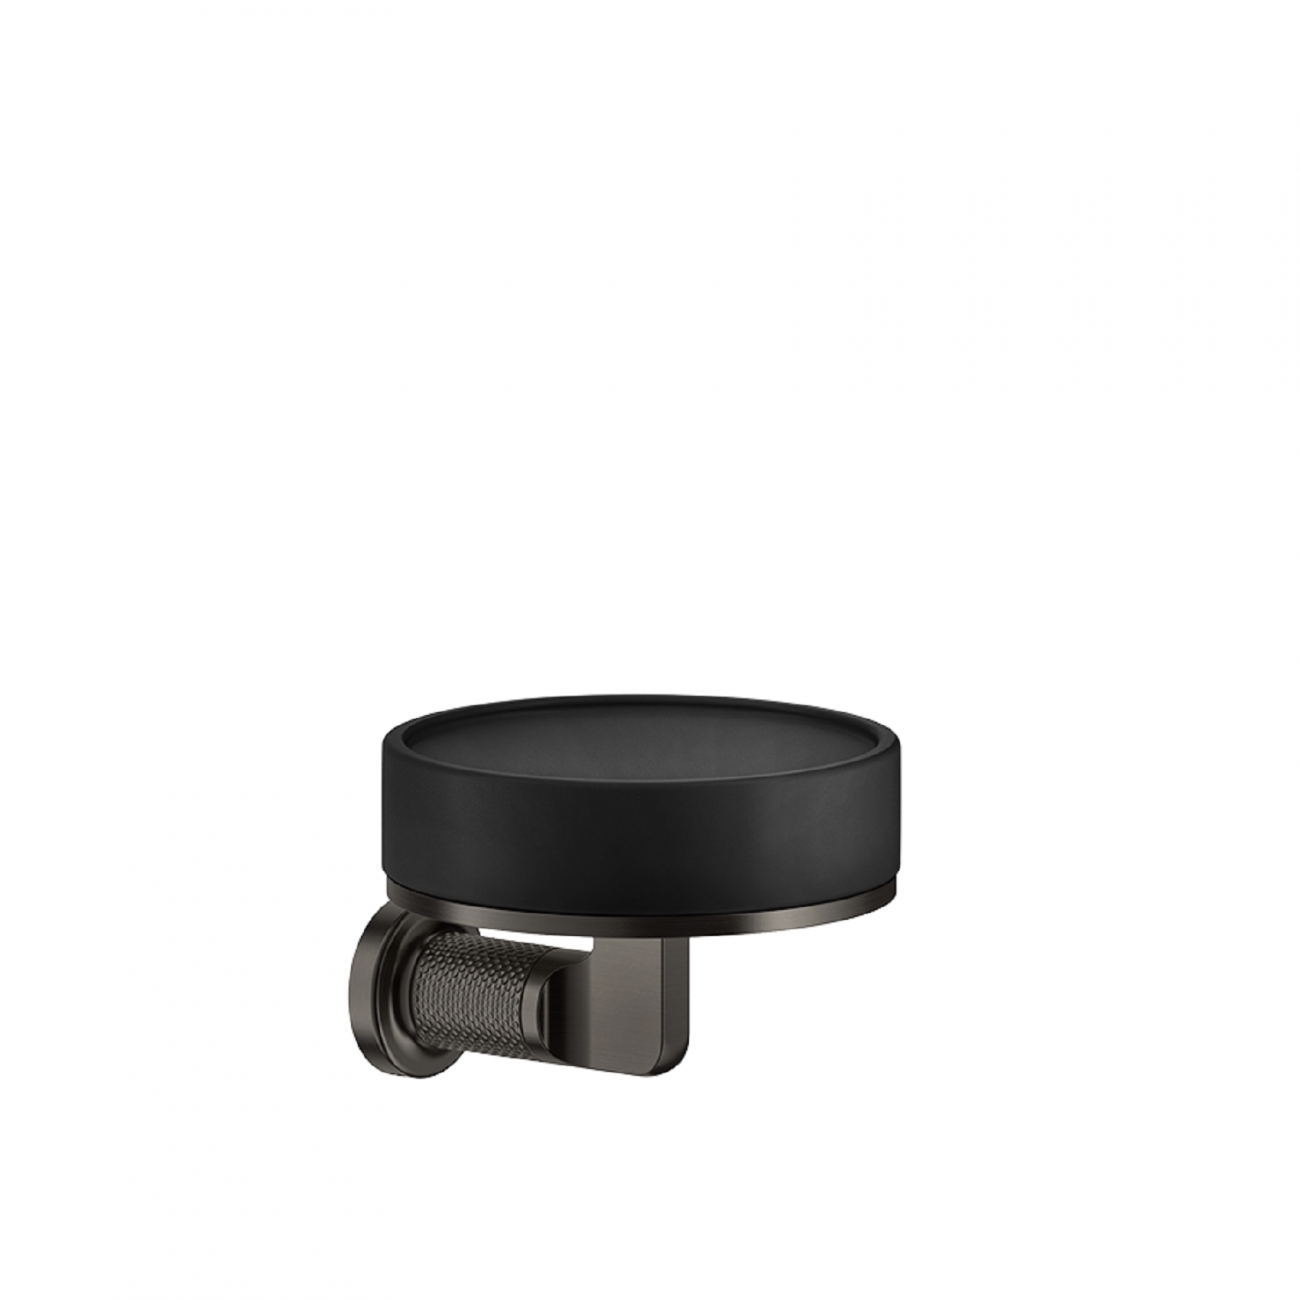 GESSI INCISO WALL MOUNTED SOAP HOLDER